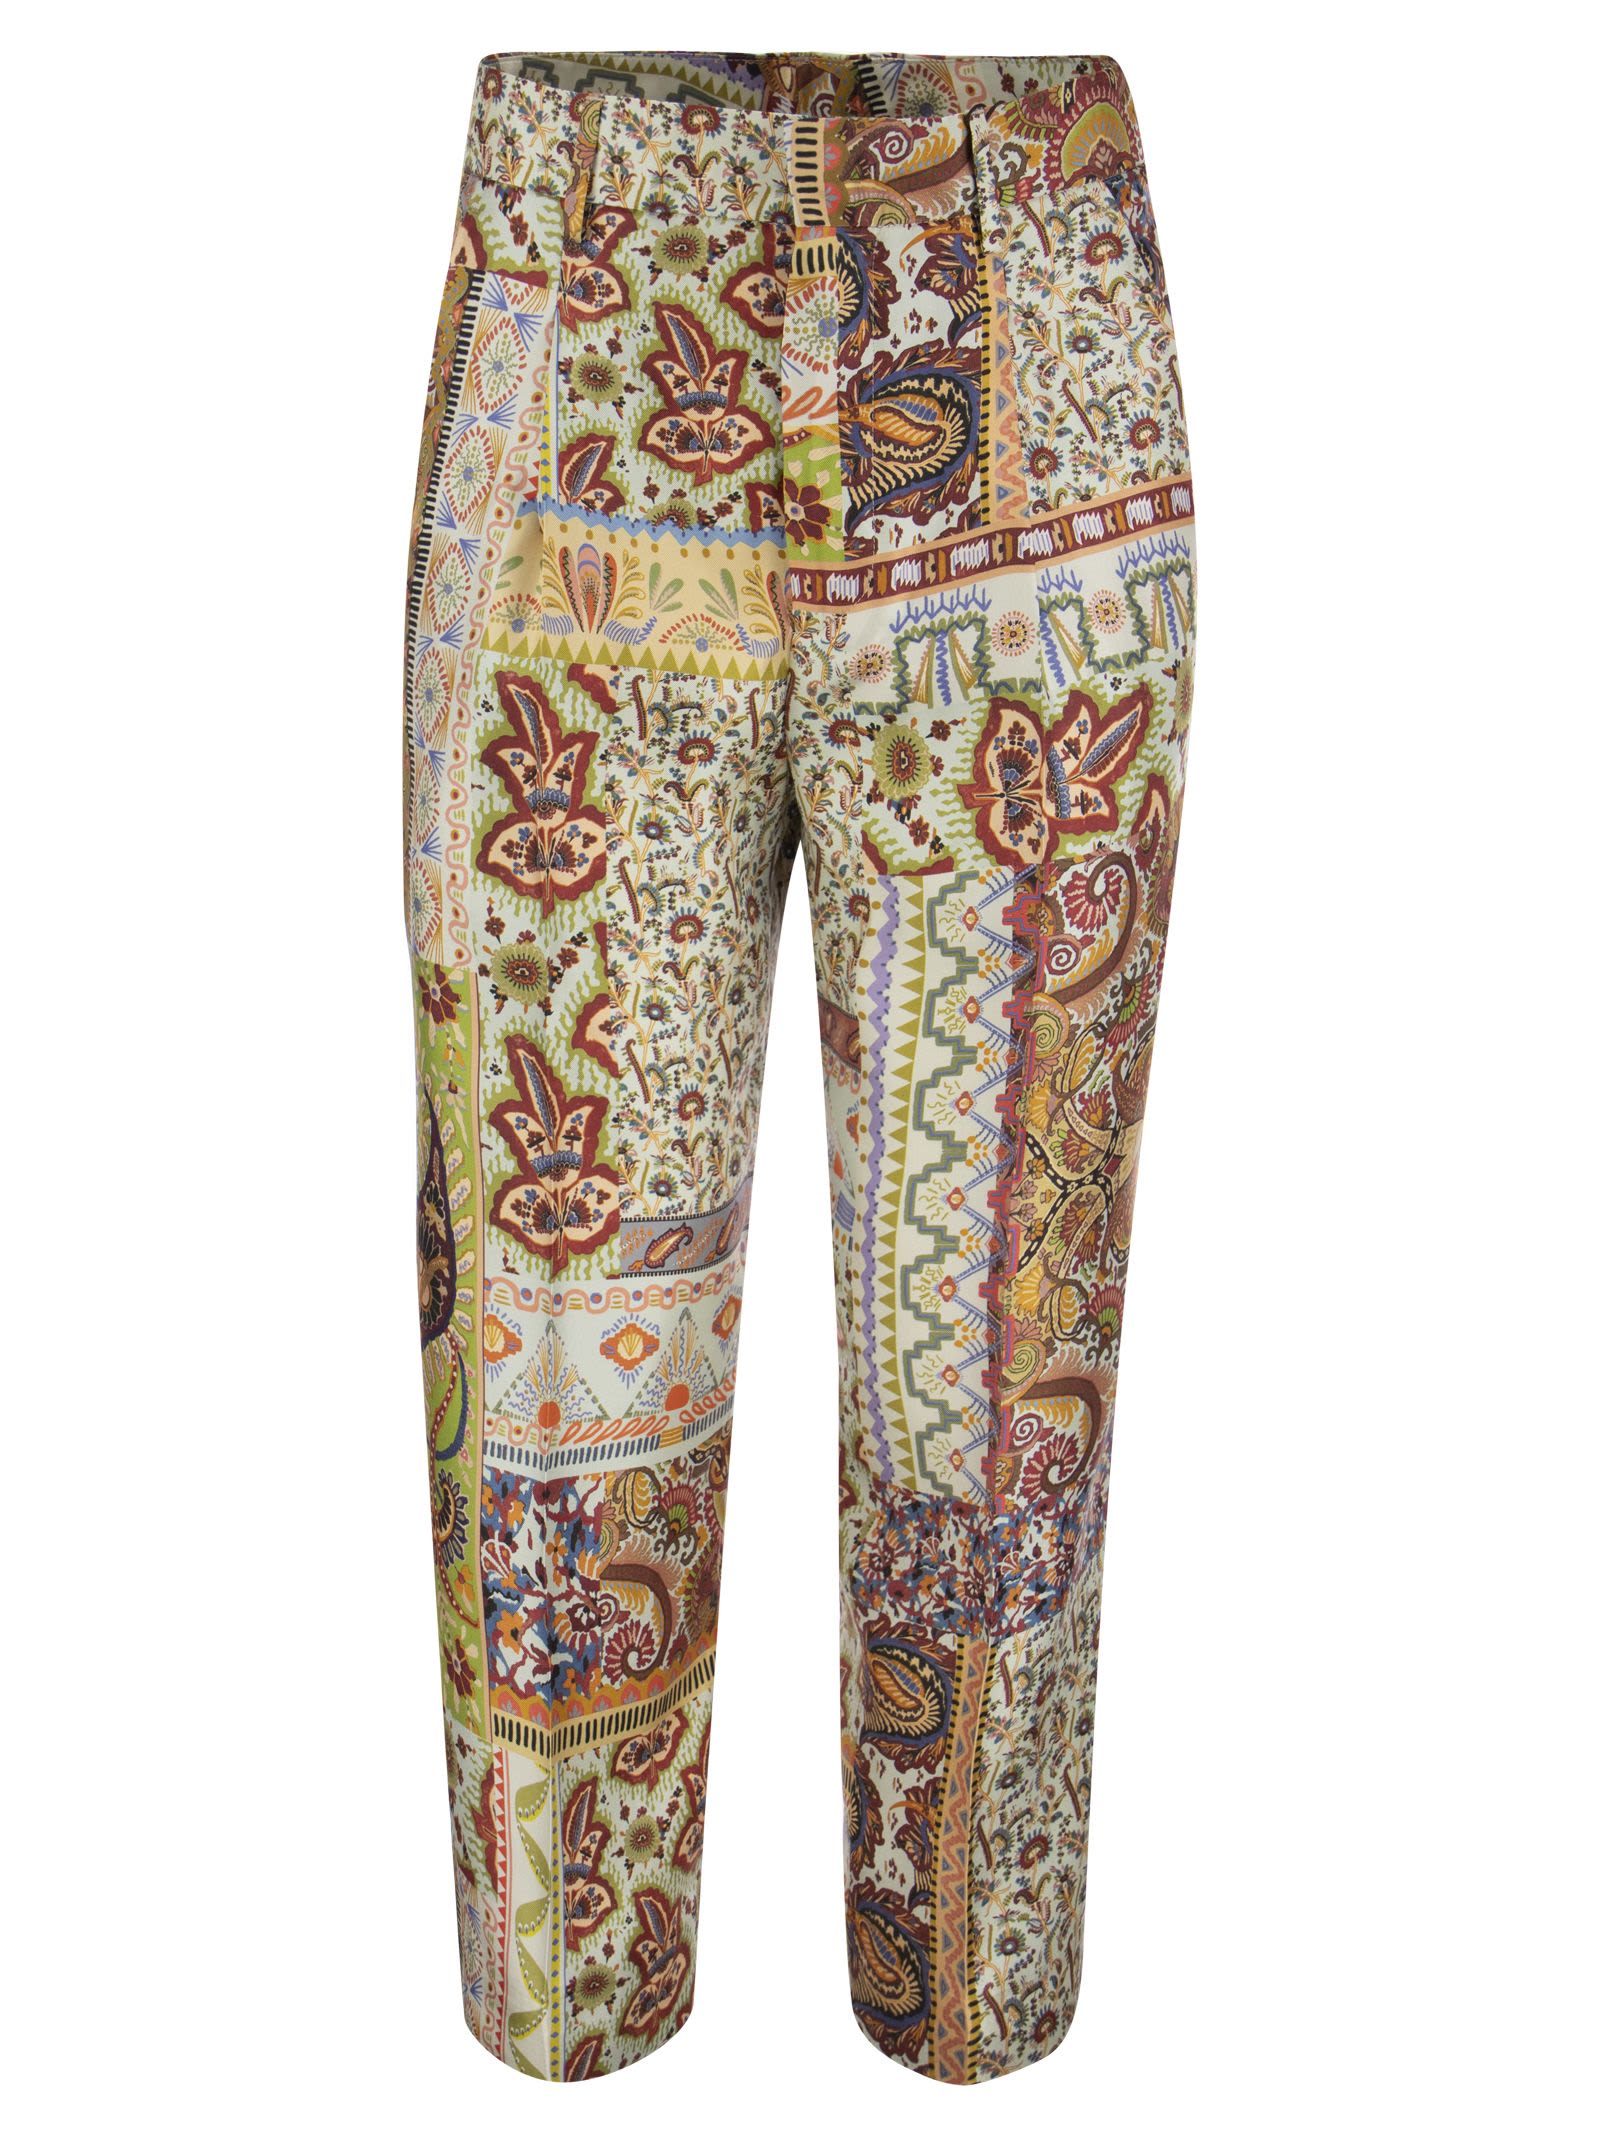 Etro Patchwork Print Trousers